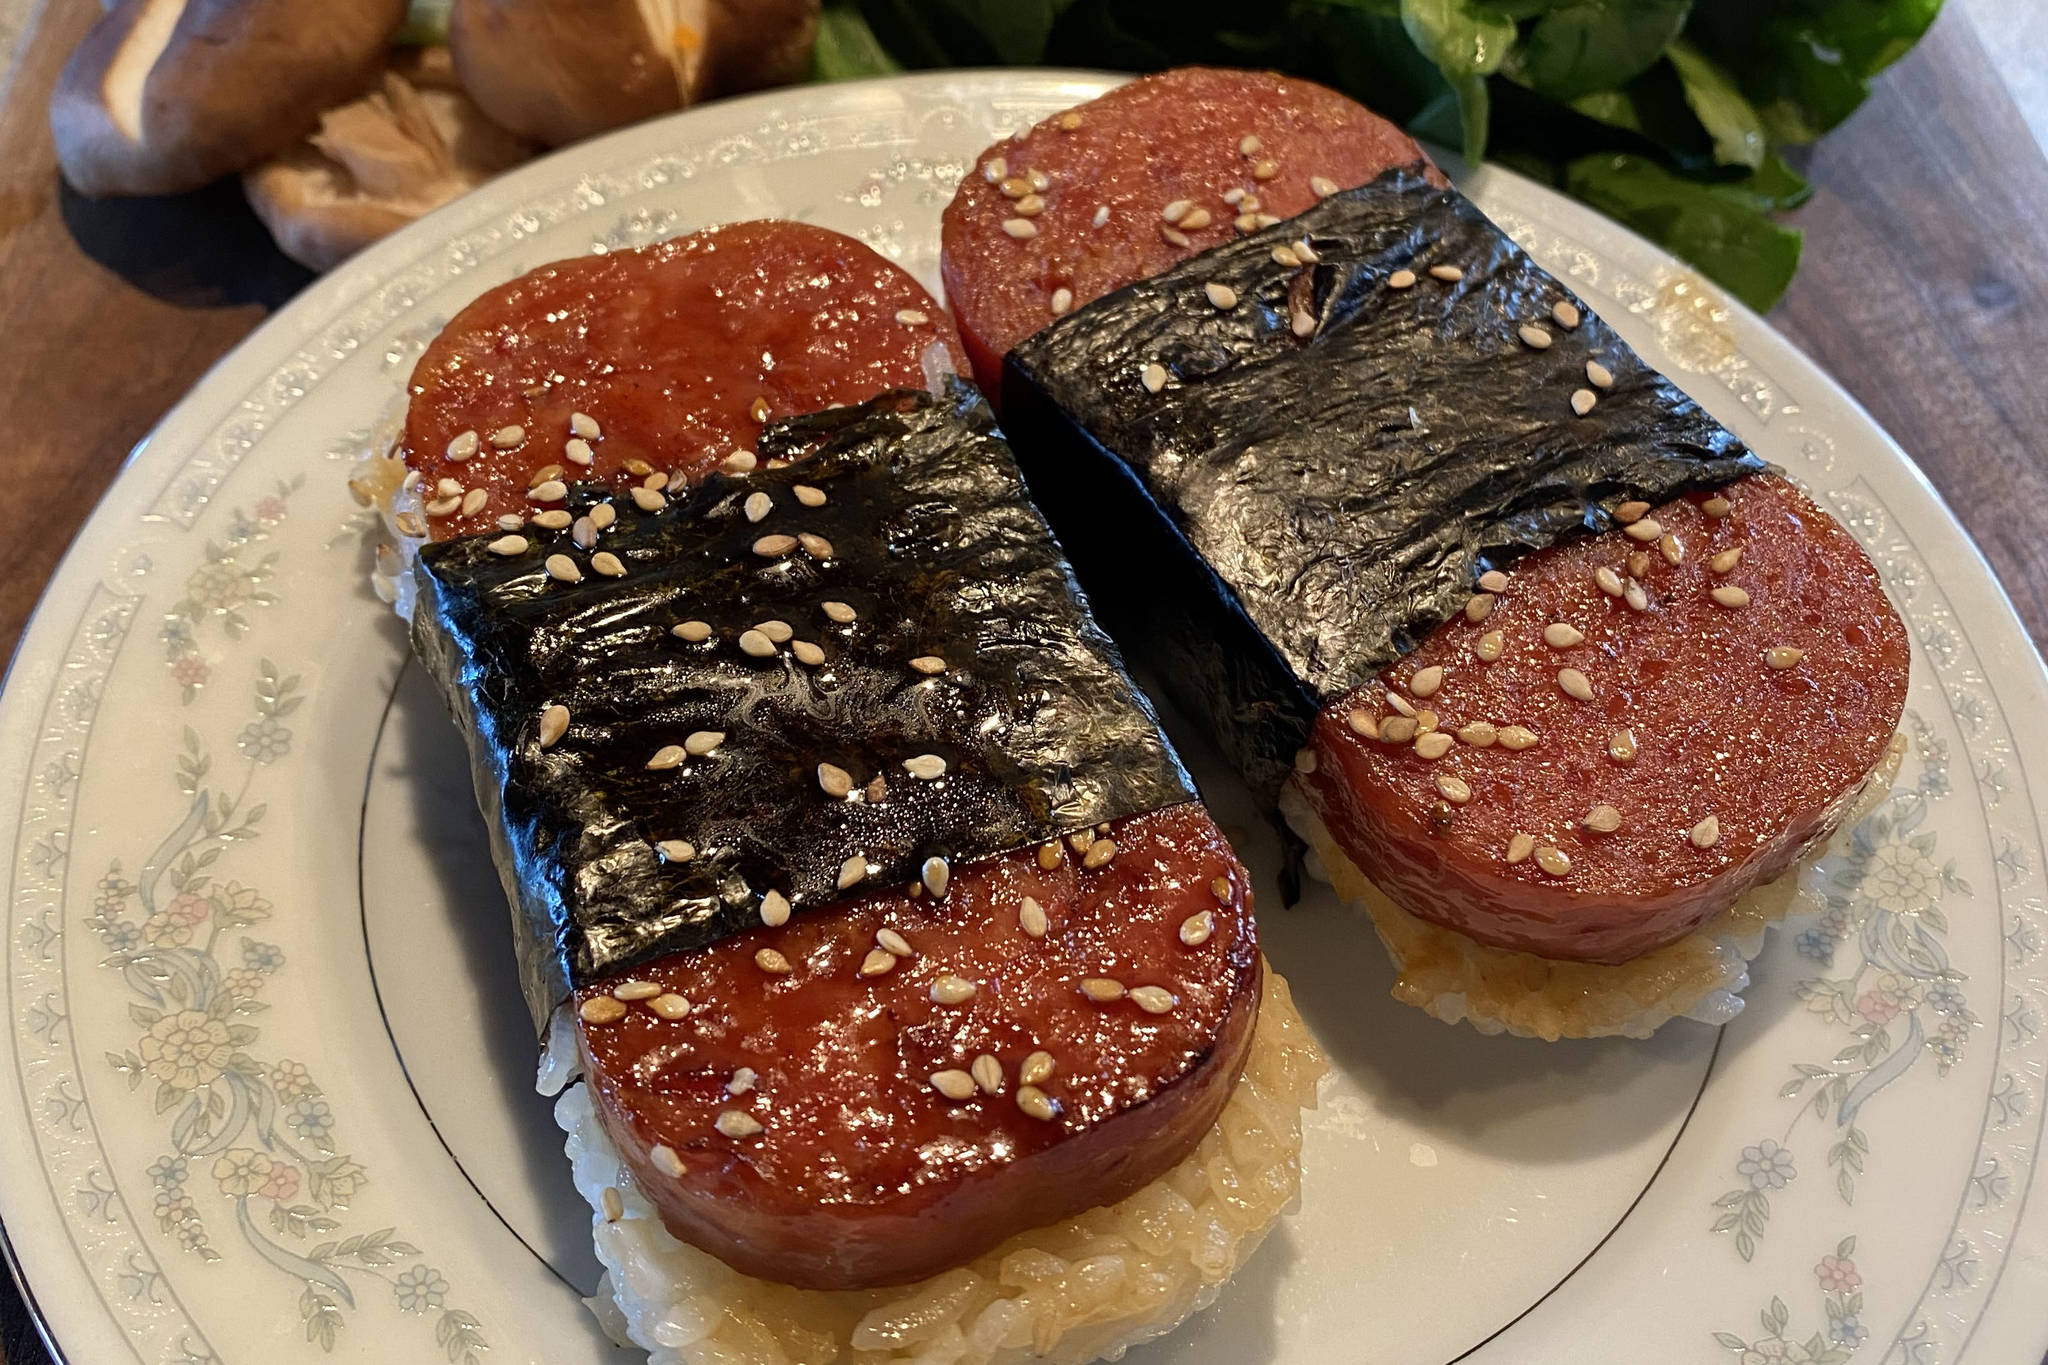 Spam, seaweed and sticky rice combine to make one of Hawaii’s most iconic road snacks. (Photo by Tressa Dale/Peninsula Clarion)